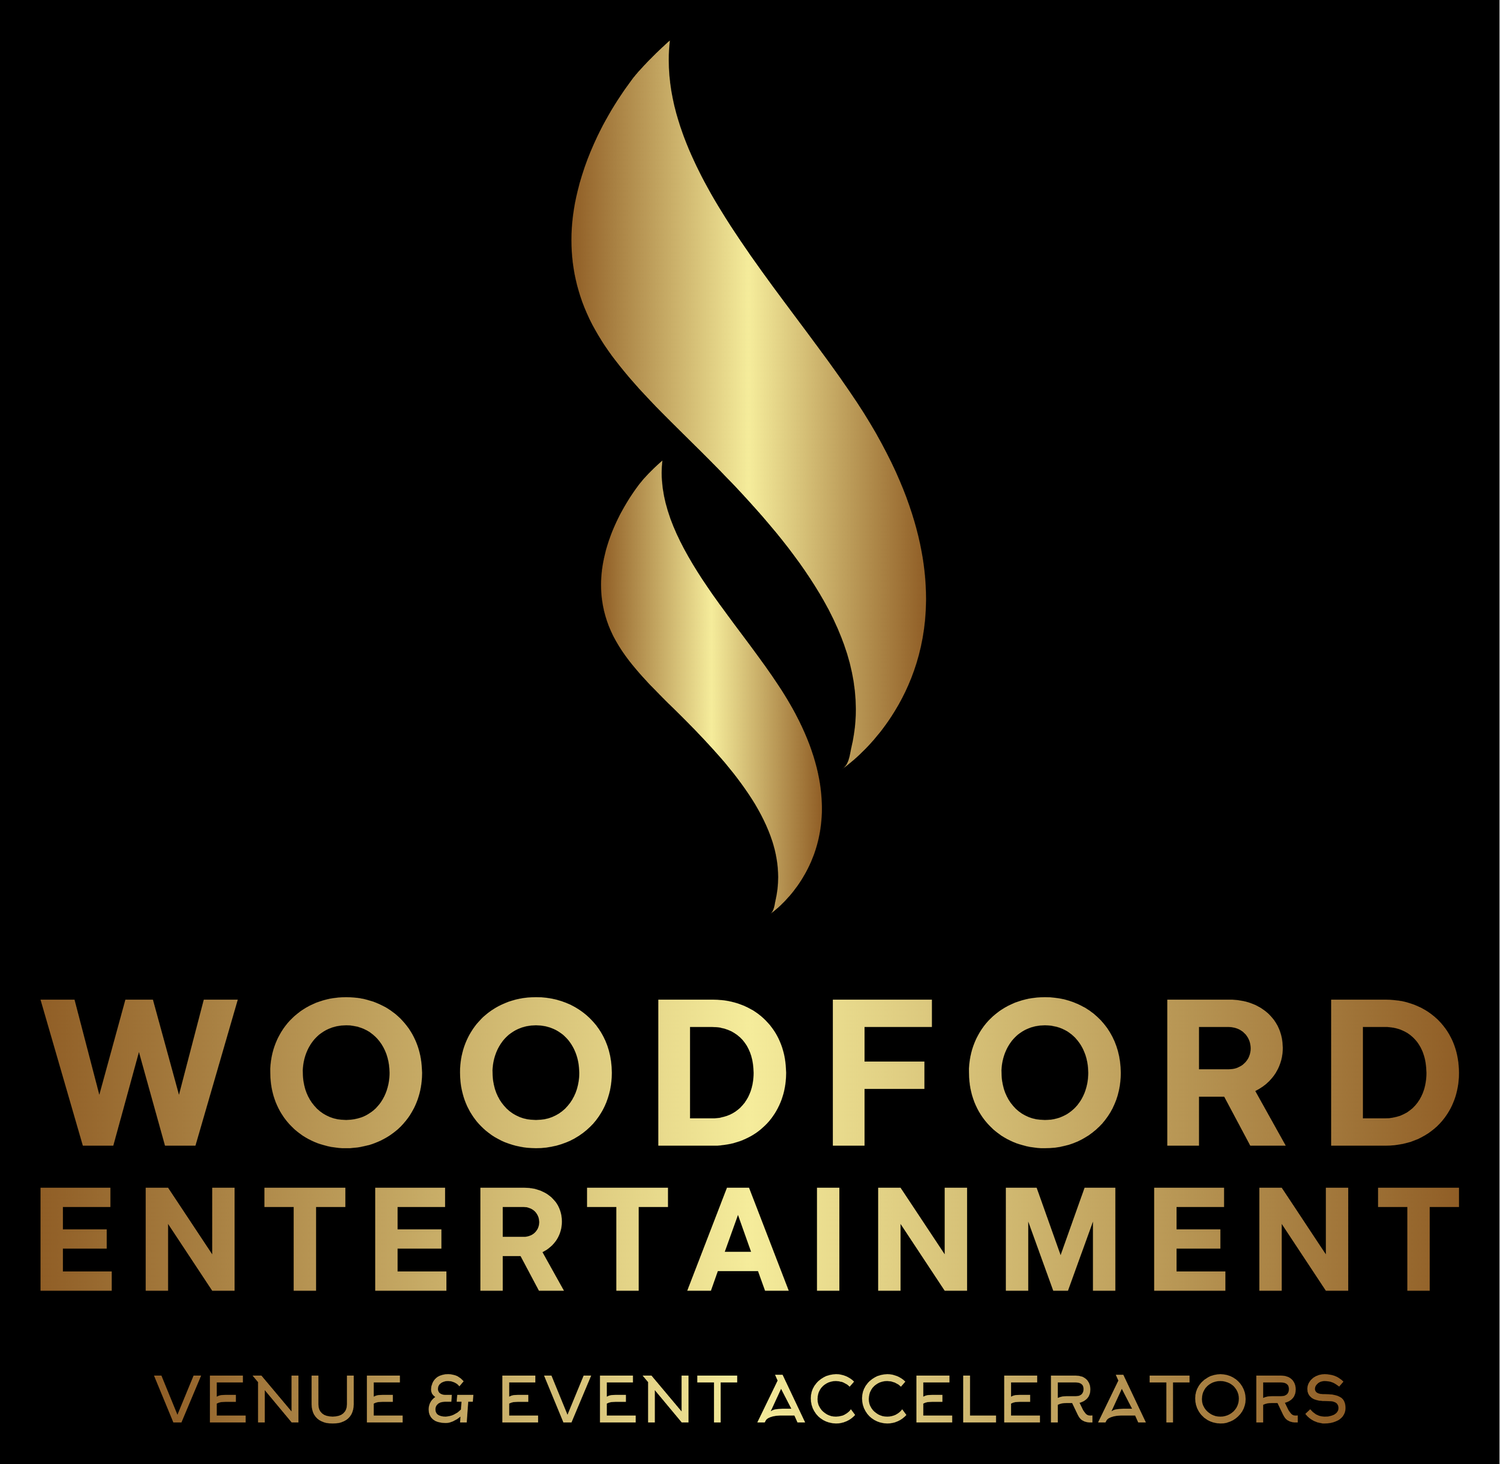 Woodford Entertainment